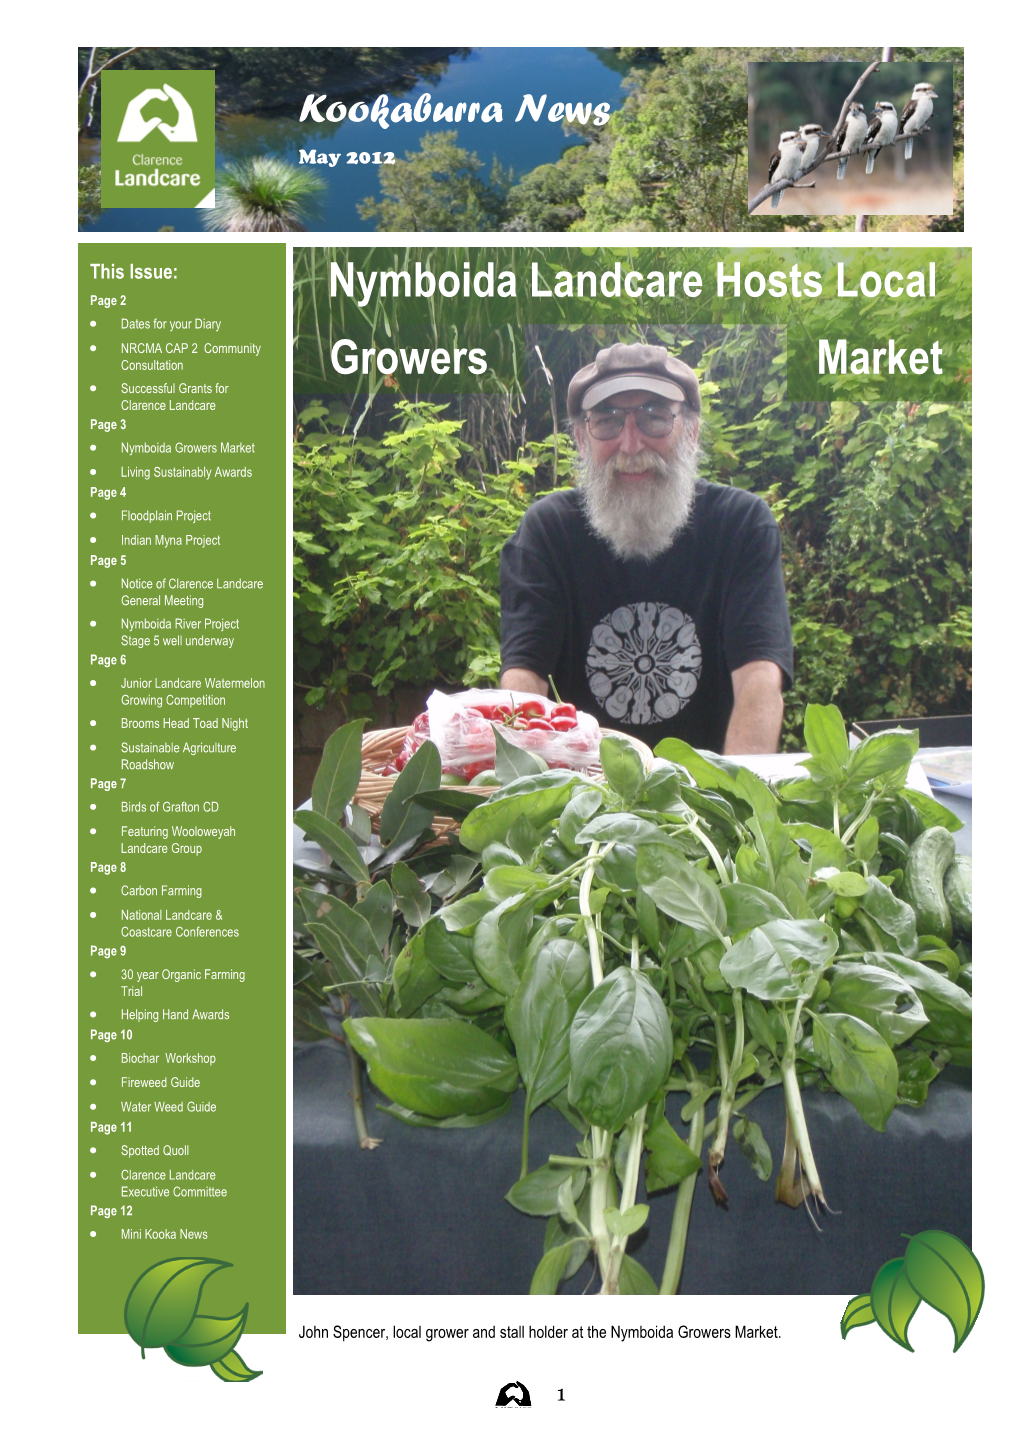 Nymboida Landcare Hosts Local Growers Market